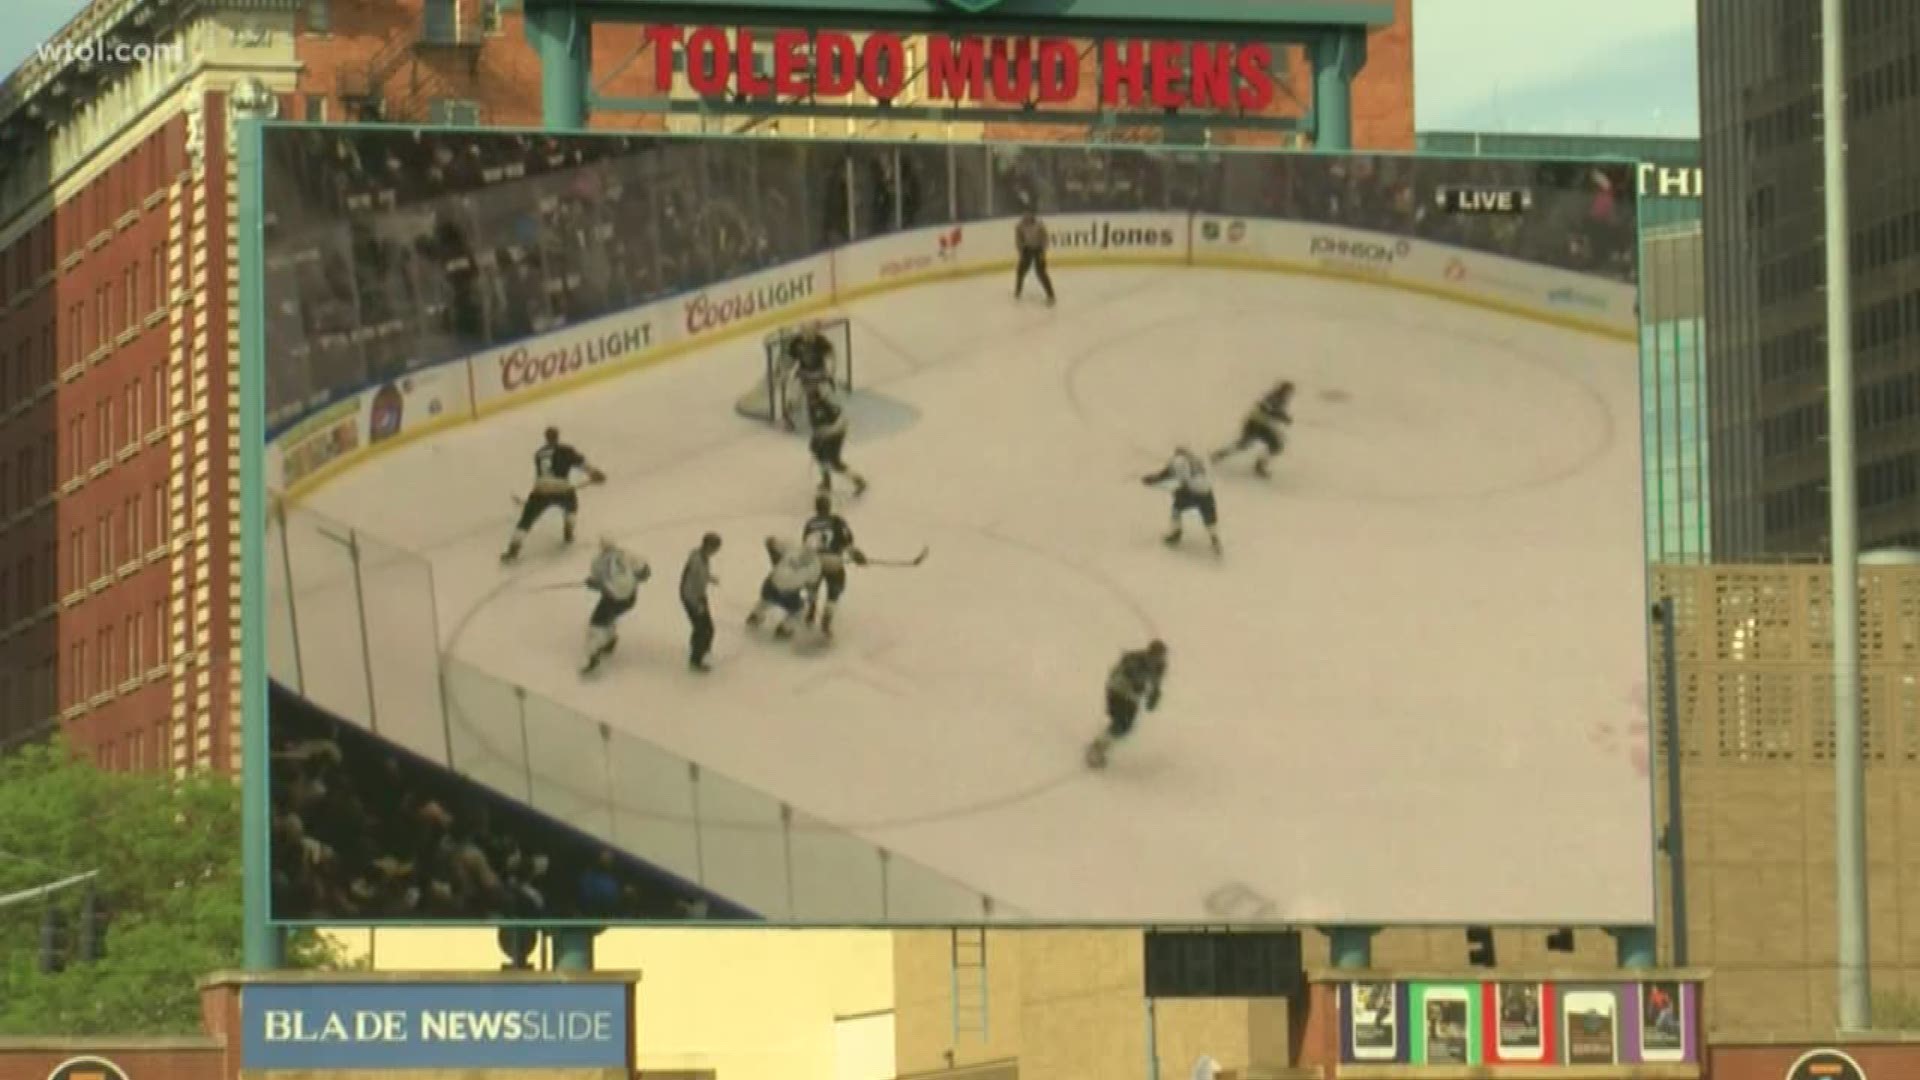 Despite fan support, the Walleye lost 4-3 in game one against Newfoundland Growlers.